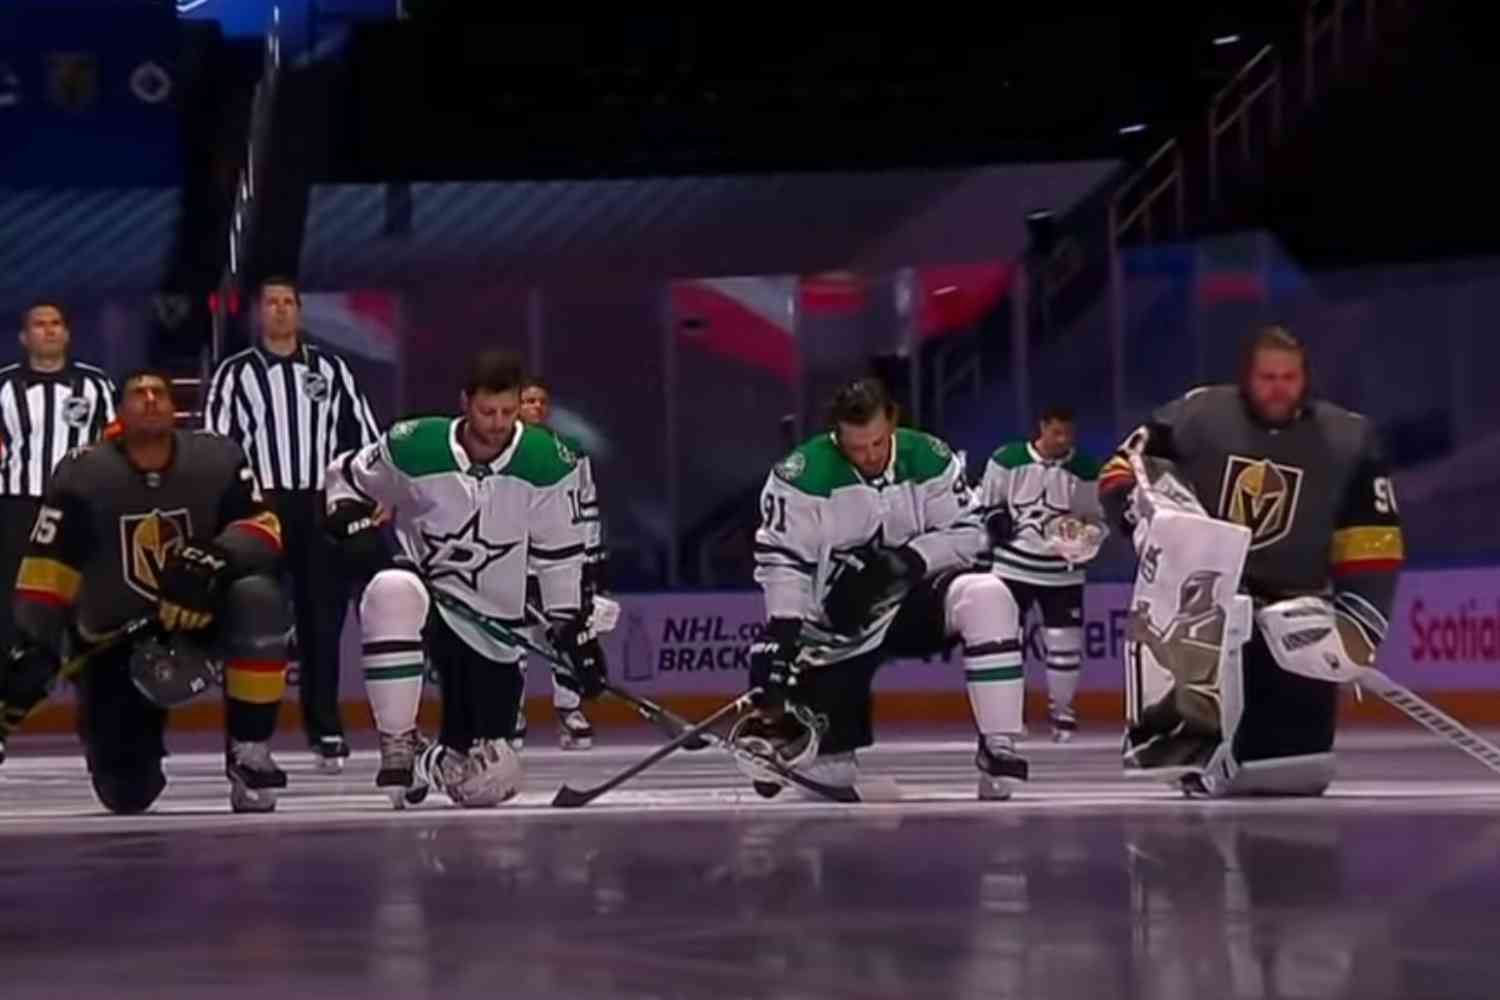 Dallas Stars CEO says team has lost season-ticket holders over support of BLM | Disrn